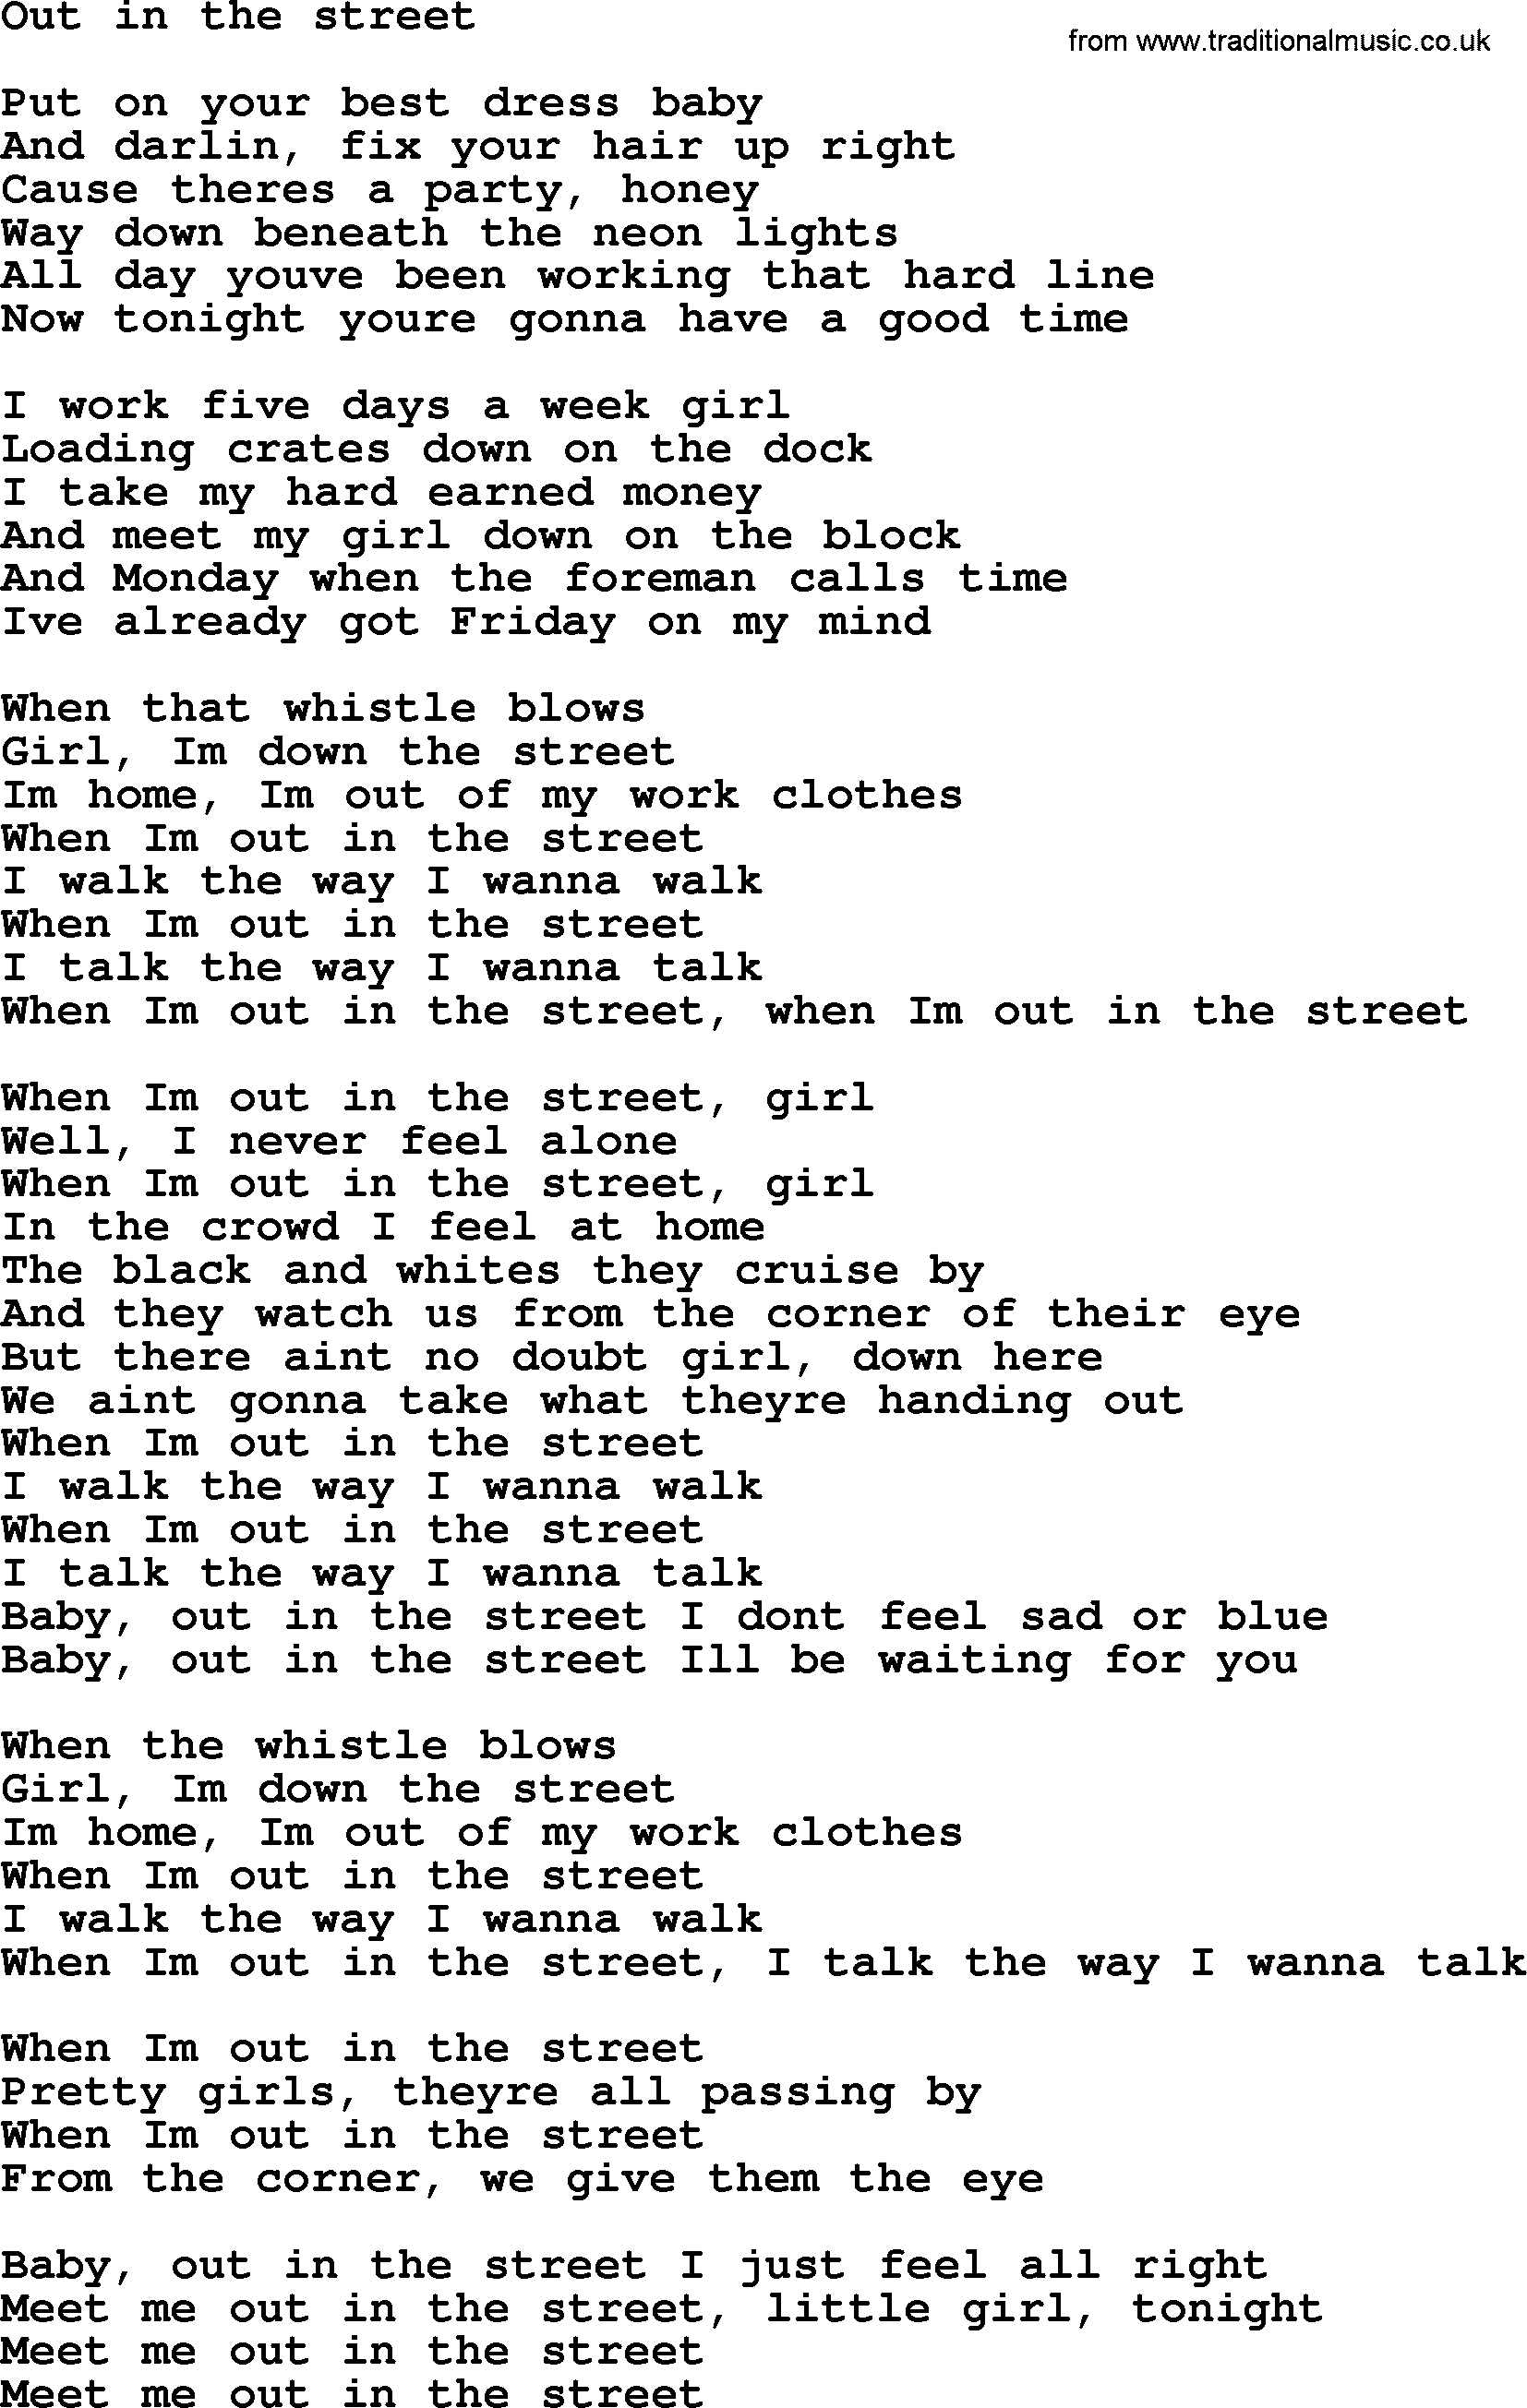 Bruce Springsteen song: Out In The Street, lyrics